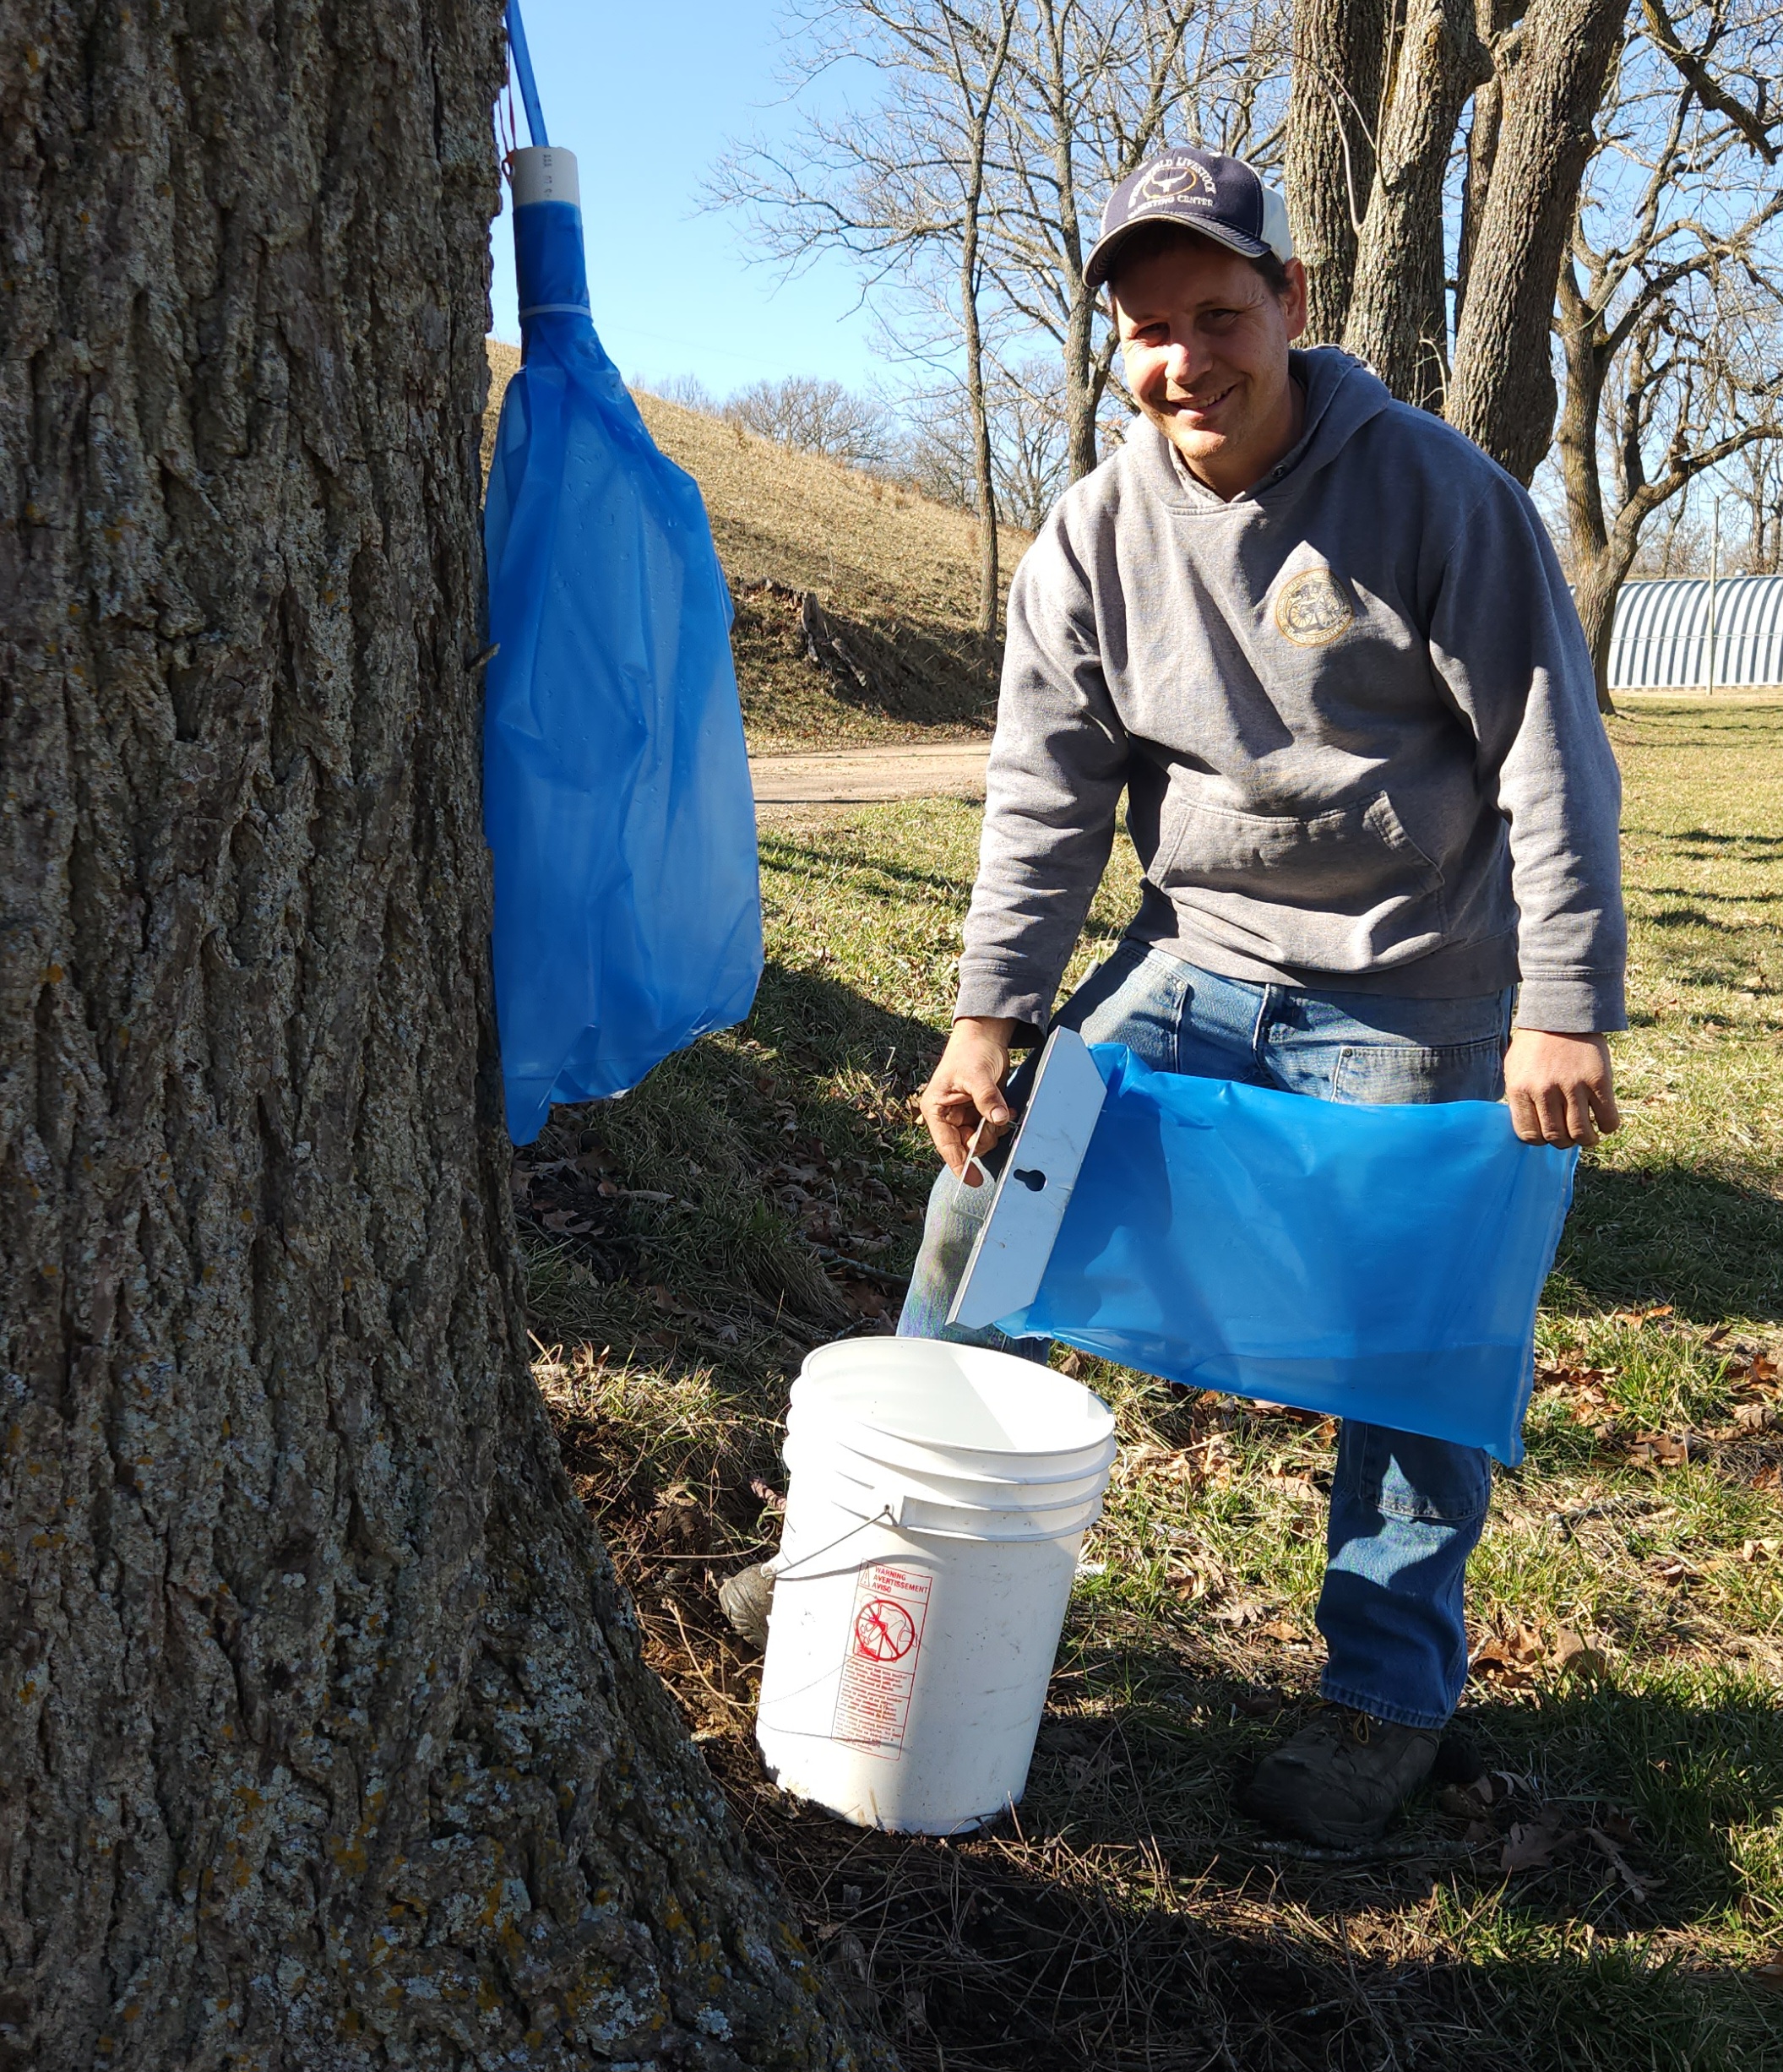 A man empties sap from a blue bag into a white plastic bucket